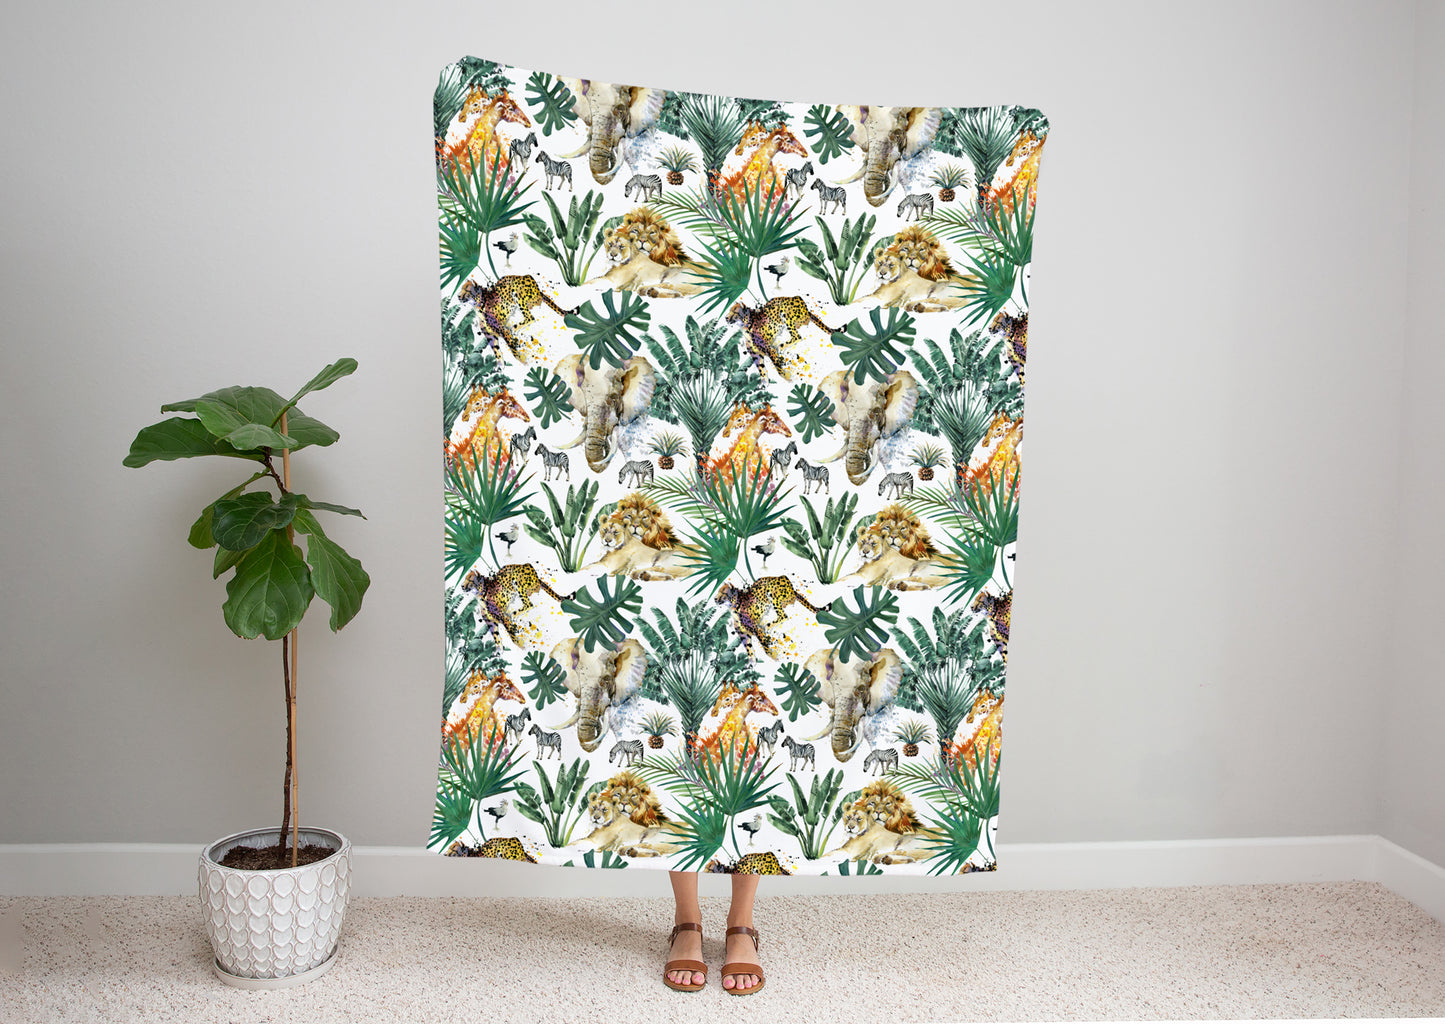 Safary Animals and Tropic Forest Blanket